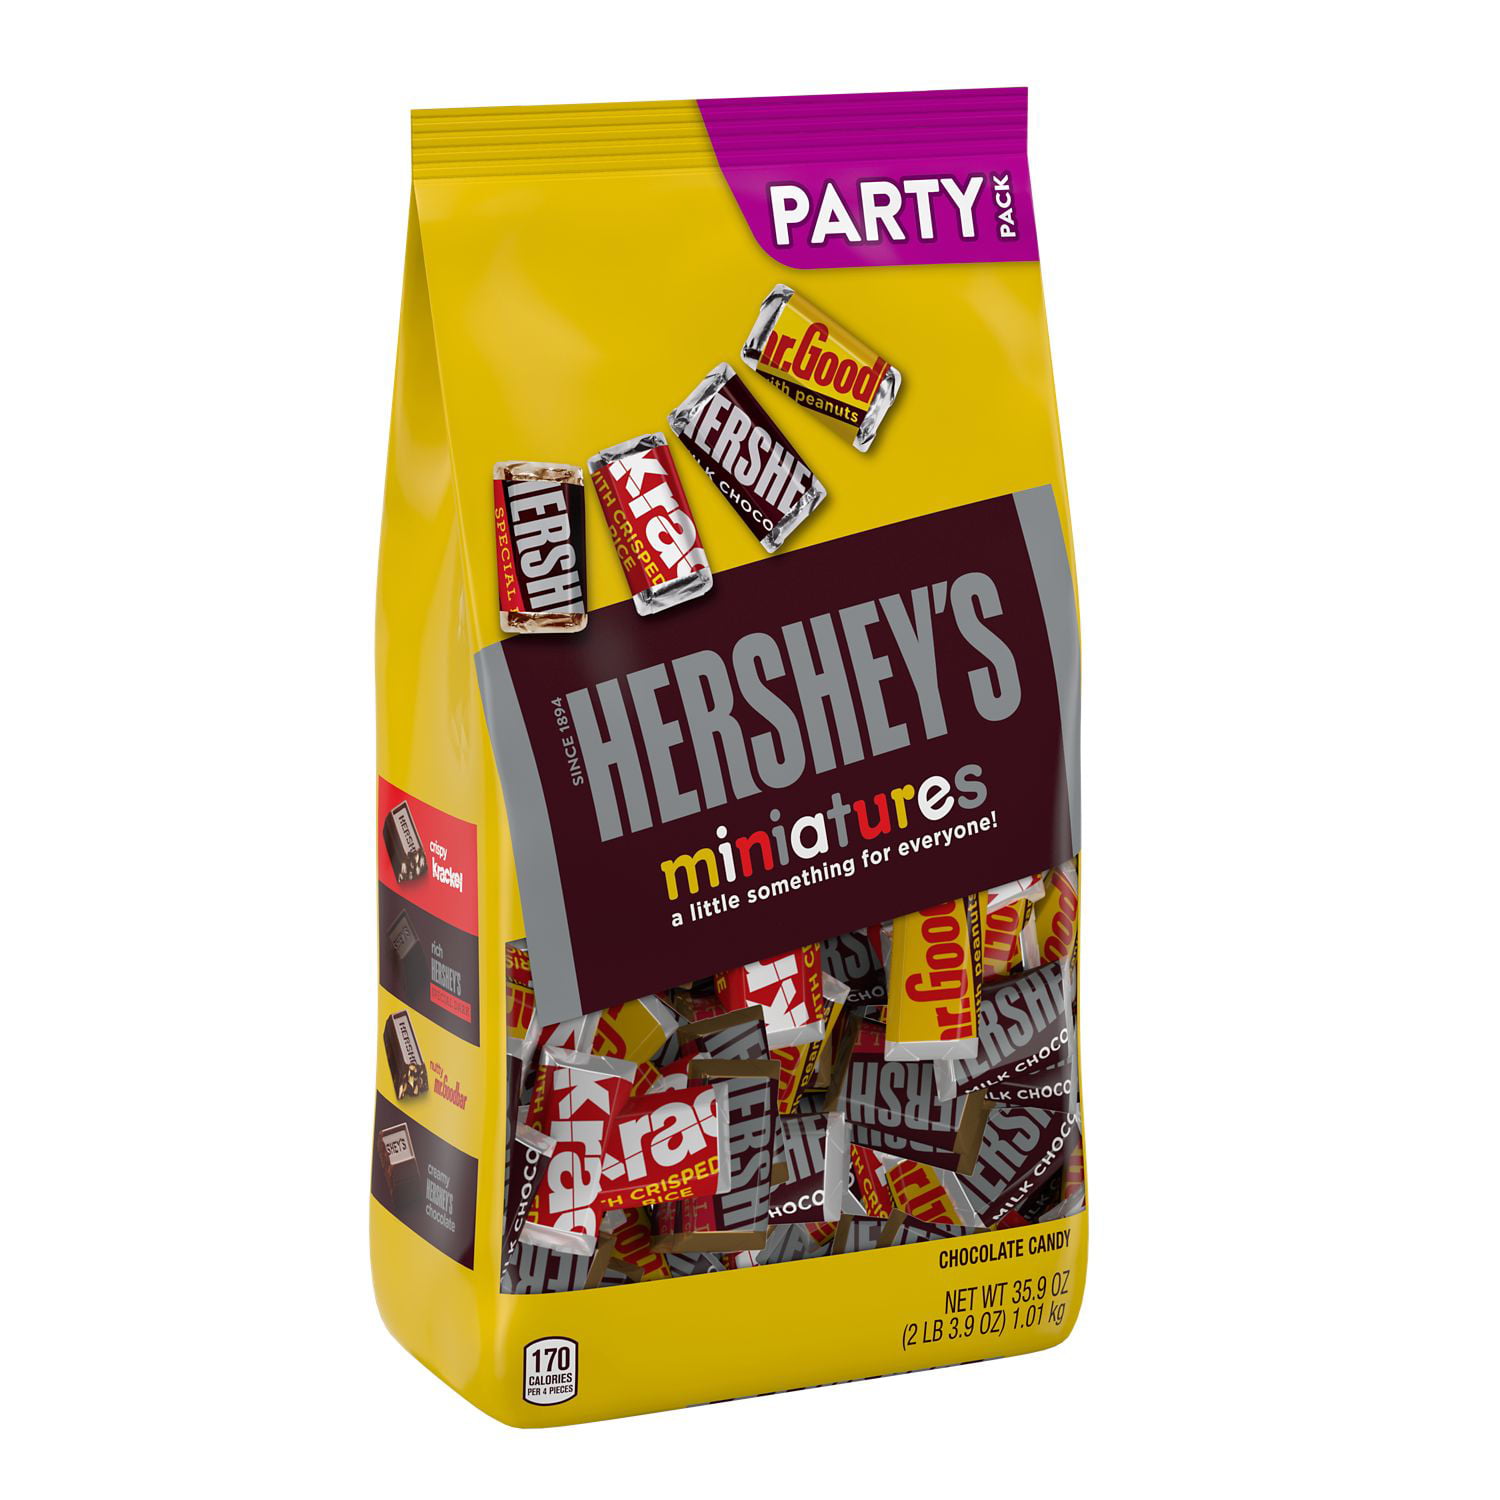 NEW Hershey's Chocolate World 3D 140 piece puzzle Wood Craft Construction Kit 